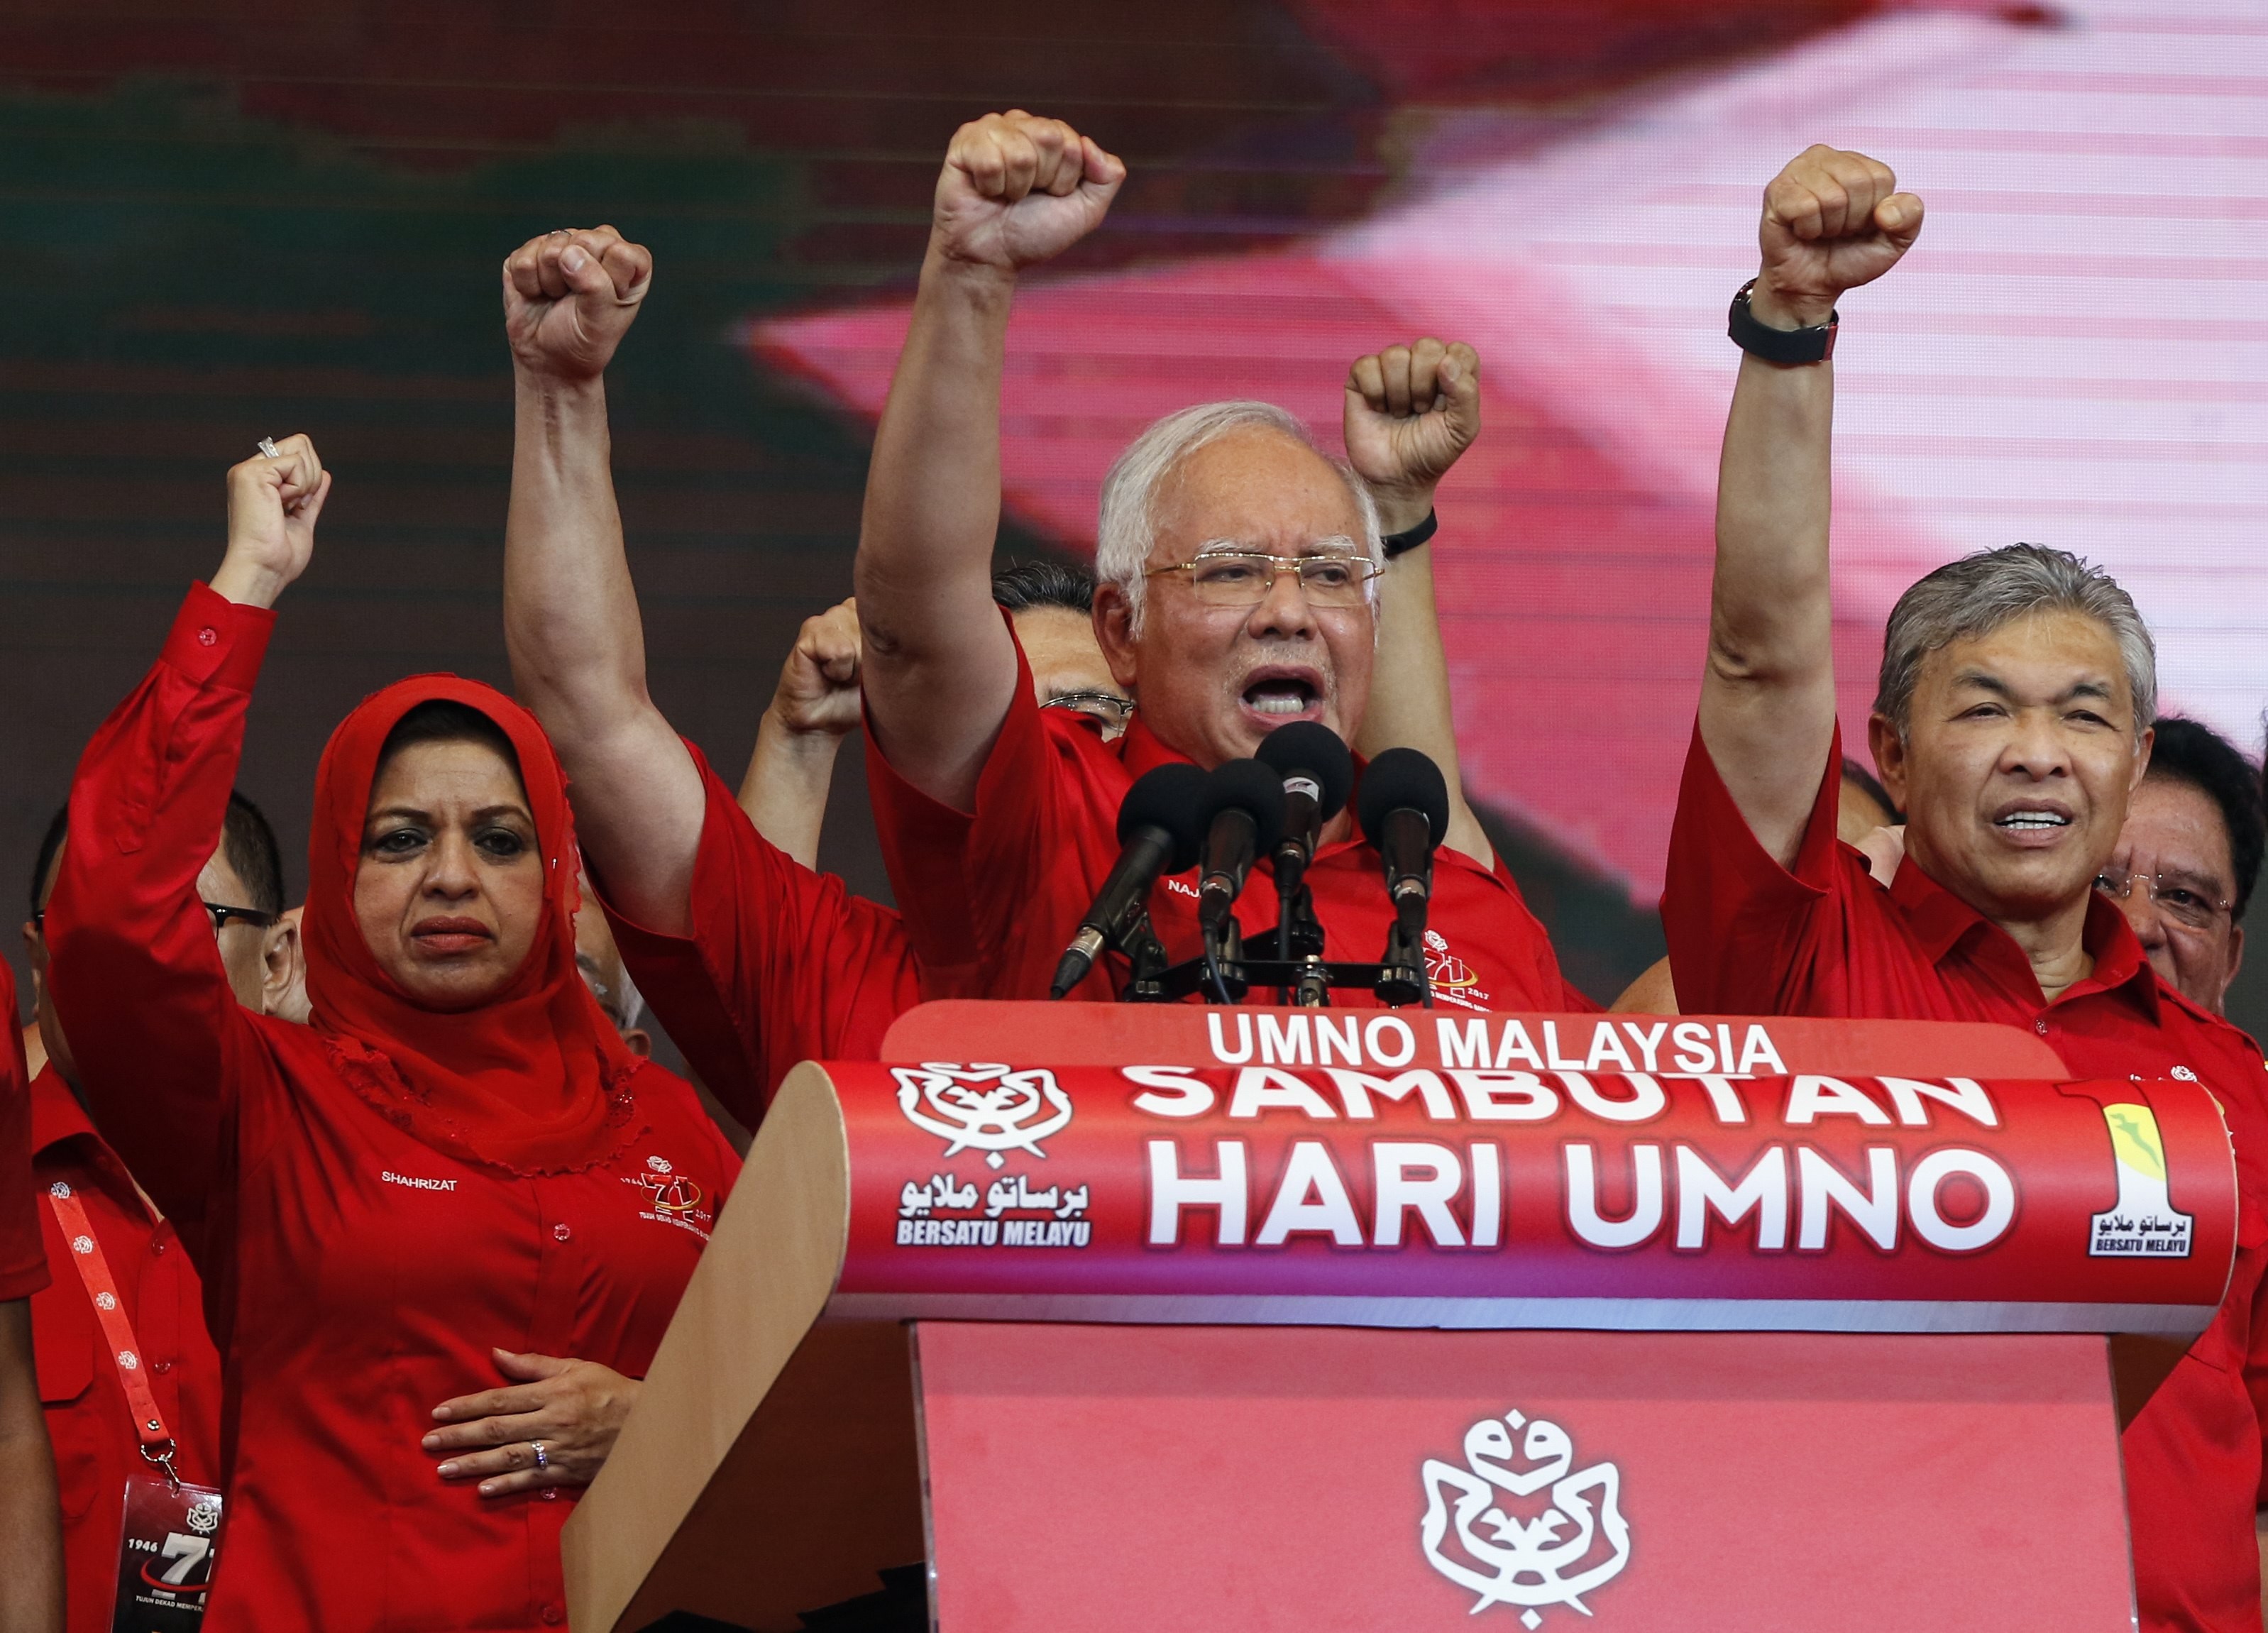 As the Umno General Assembly gets underway, the time has come to deal with the long-term negative consequences of the party’s Malay-centrism